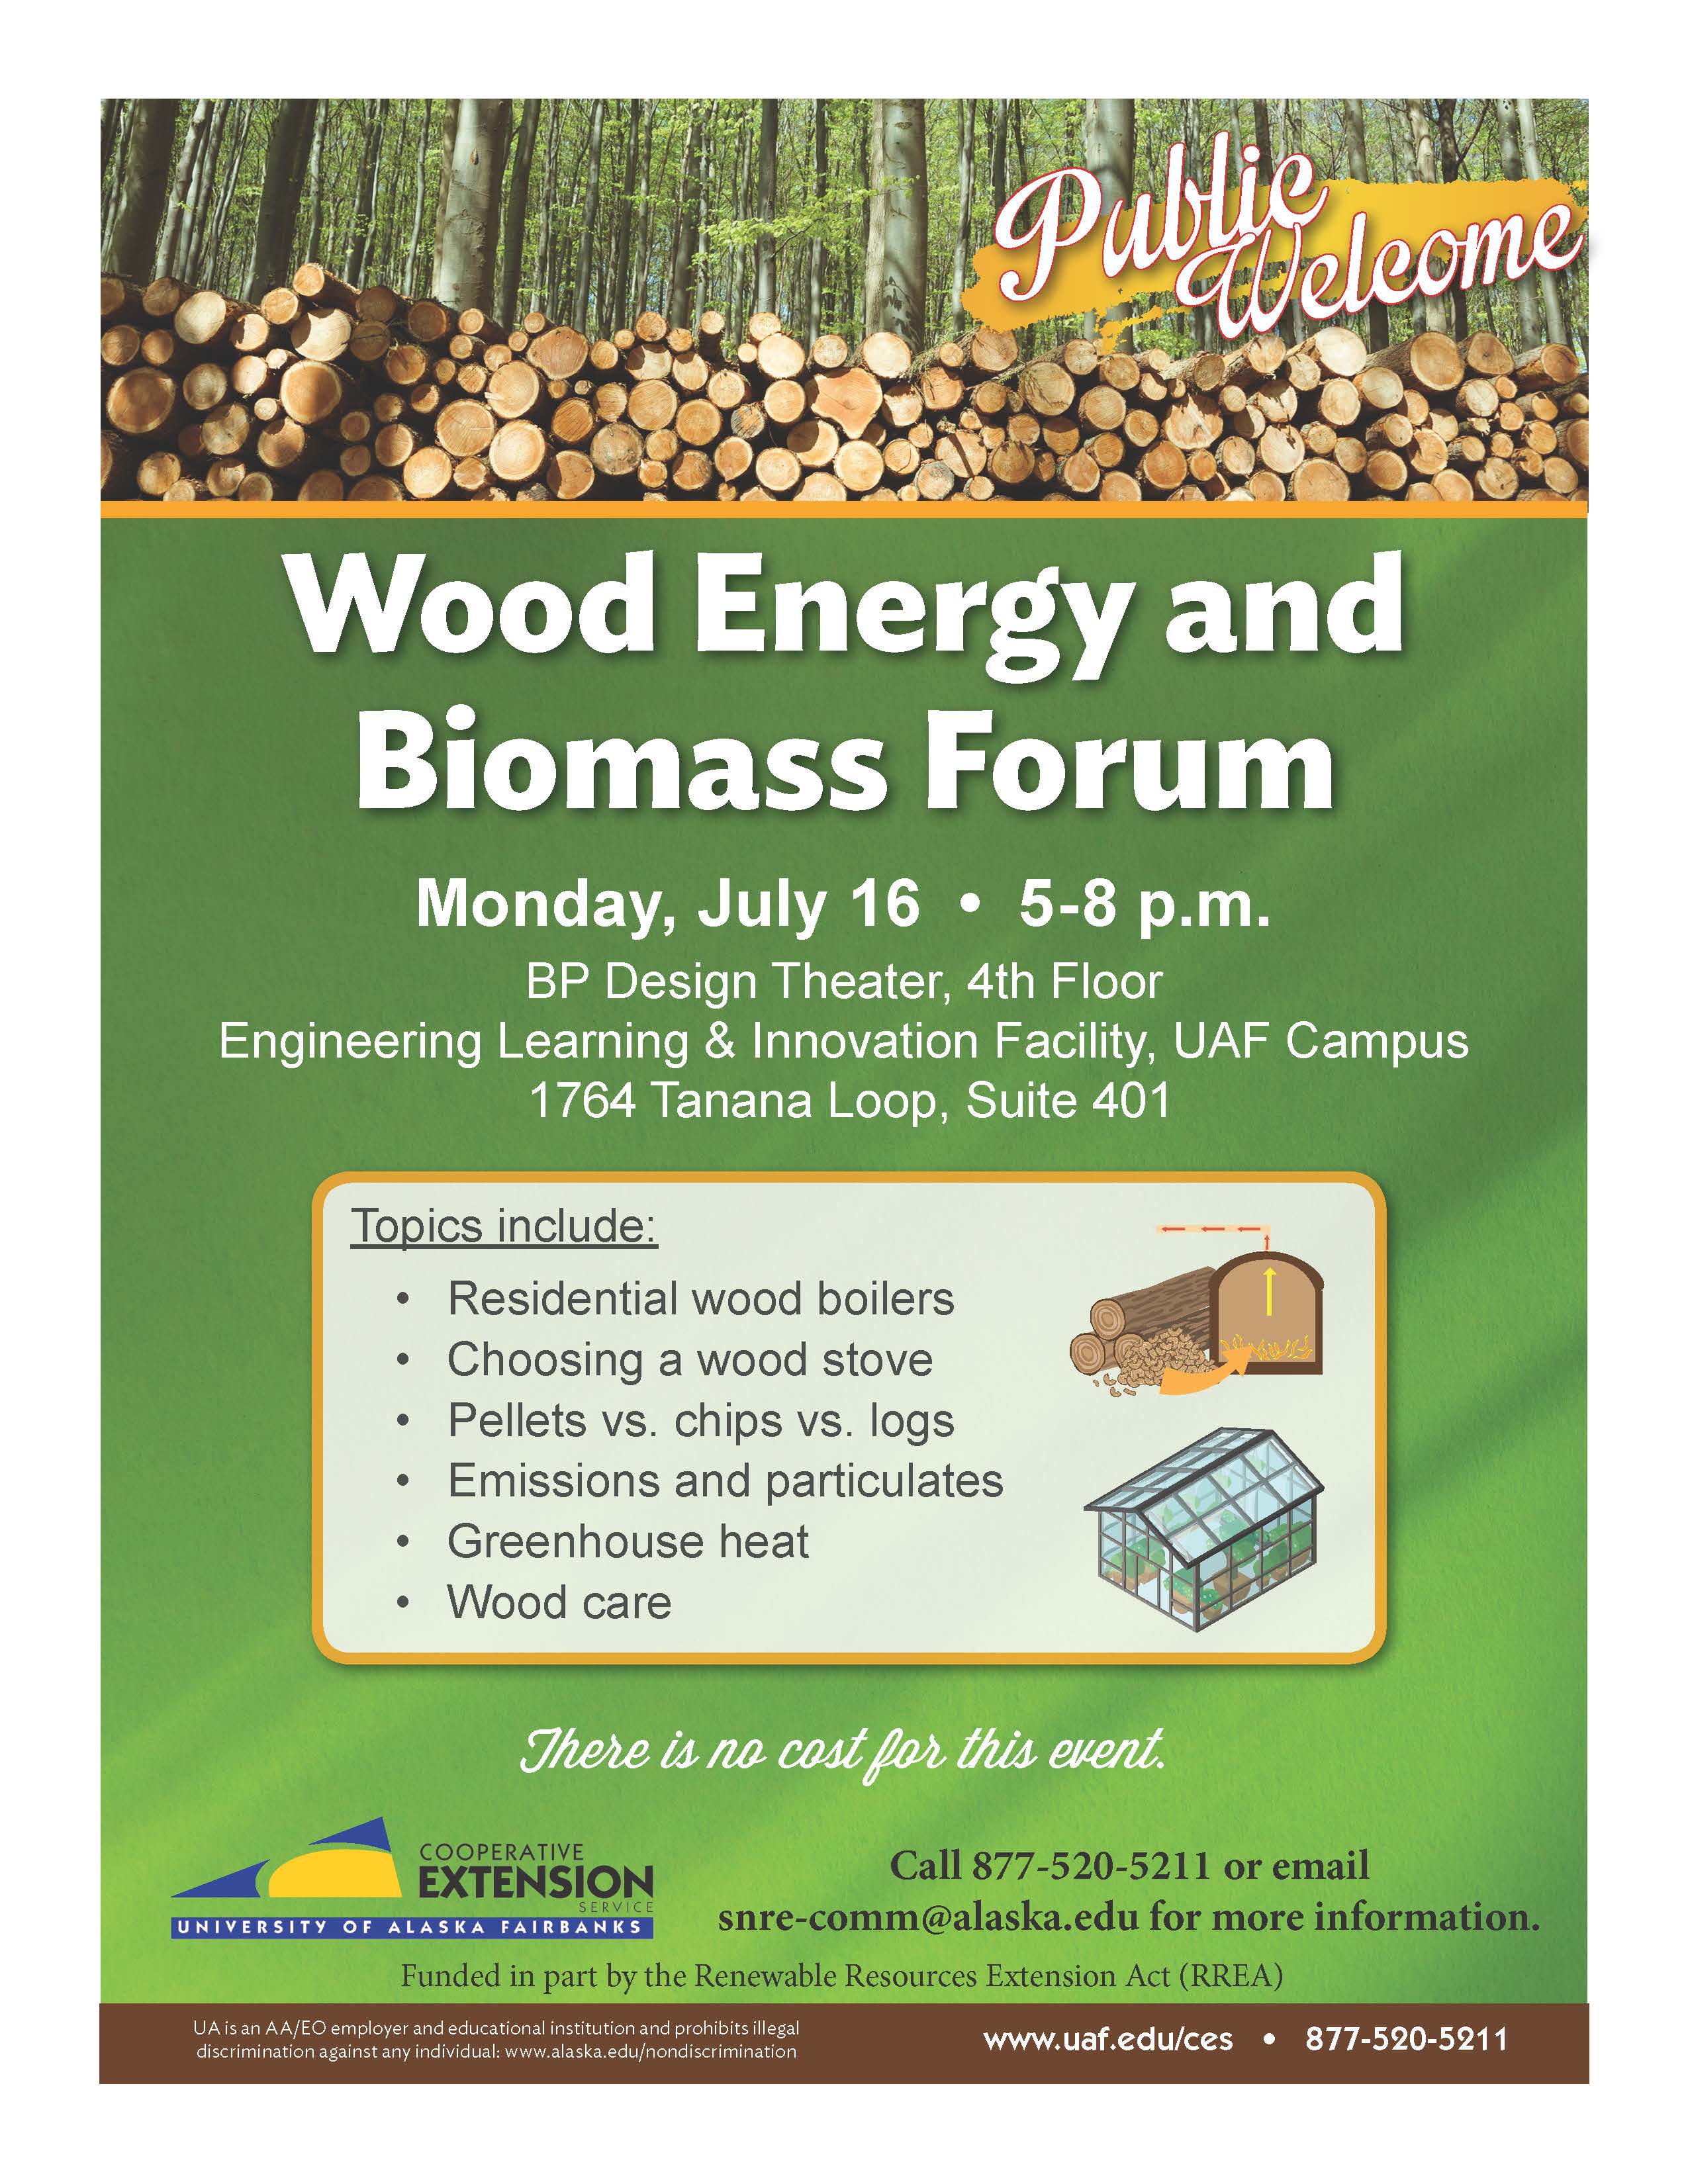 UAF Extension Hosts Free Wood Energy and Biomass Forum